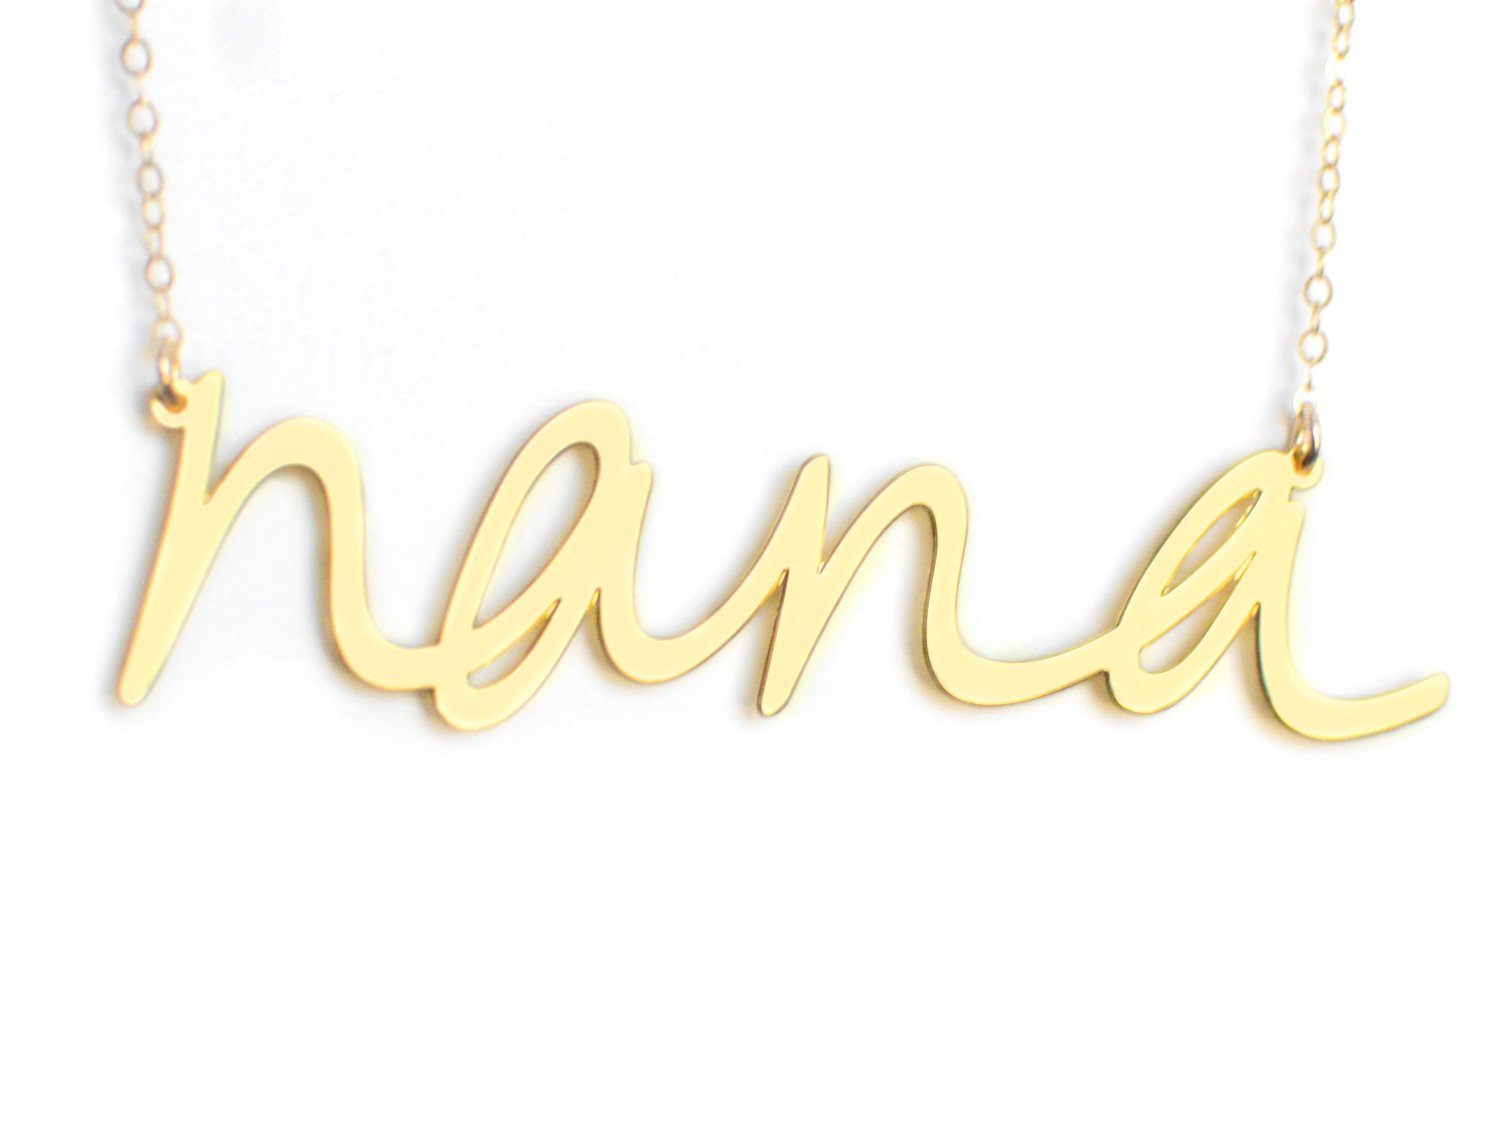 Nana Necklace - High Quality, Affordable, Hand Written, Self Love Word Necklace - Available in Gold and Silver - Small and Large Sizes - Made in USA - Brevity Jewelry - Gift for Grandma.